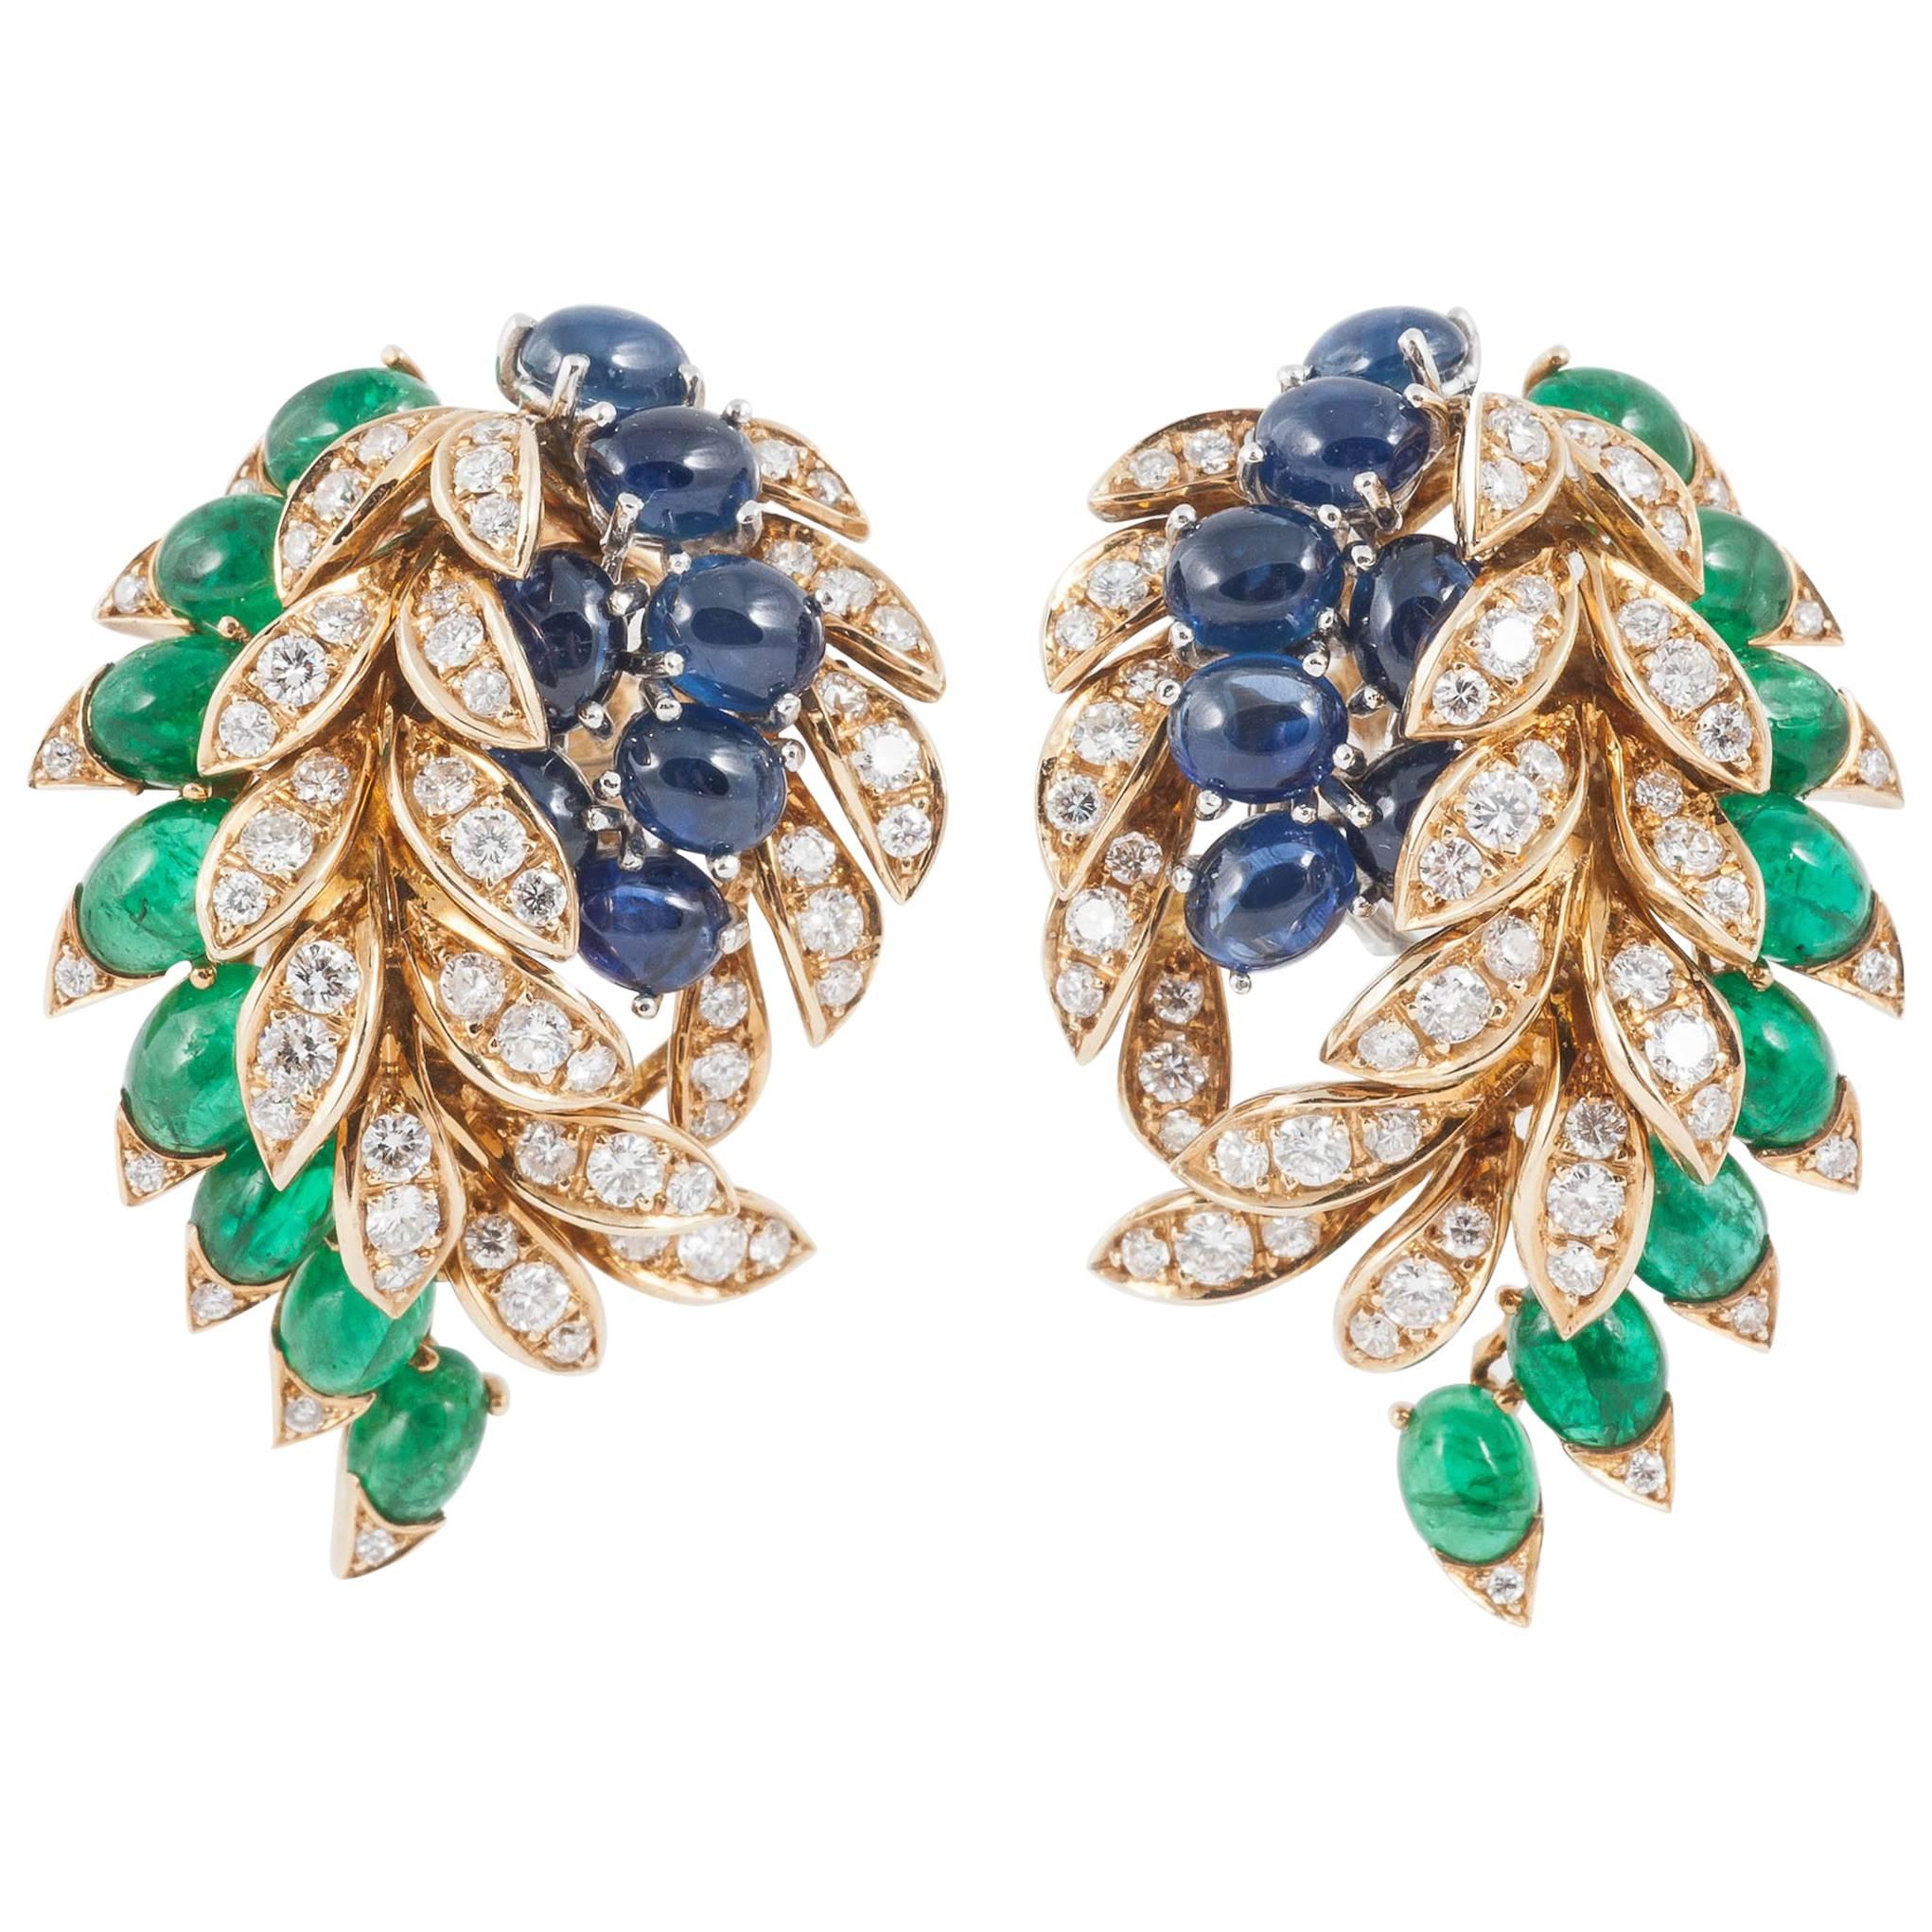 Fasano Turin Italy Multi Gem Set Gold Clip-On Earrings For Sale